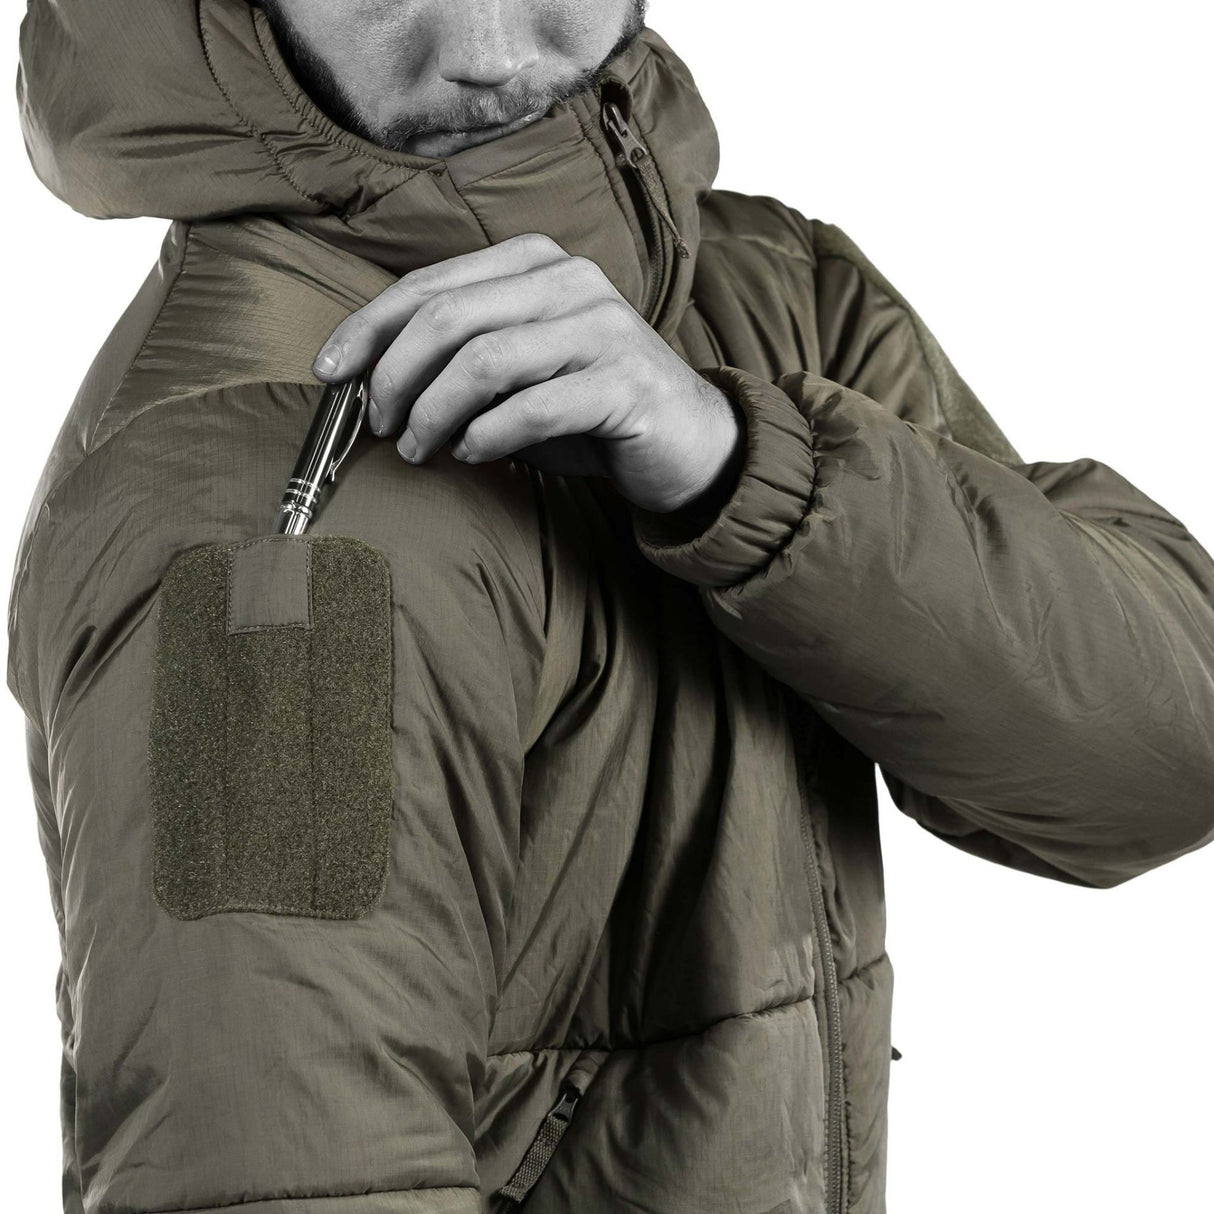 UF PRO Delta ComPac Tactical Winter Jacket: Additional storage options with Velcro cover and upper-arm Velcro areas.